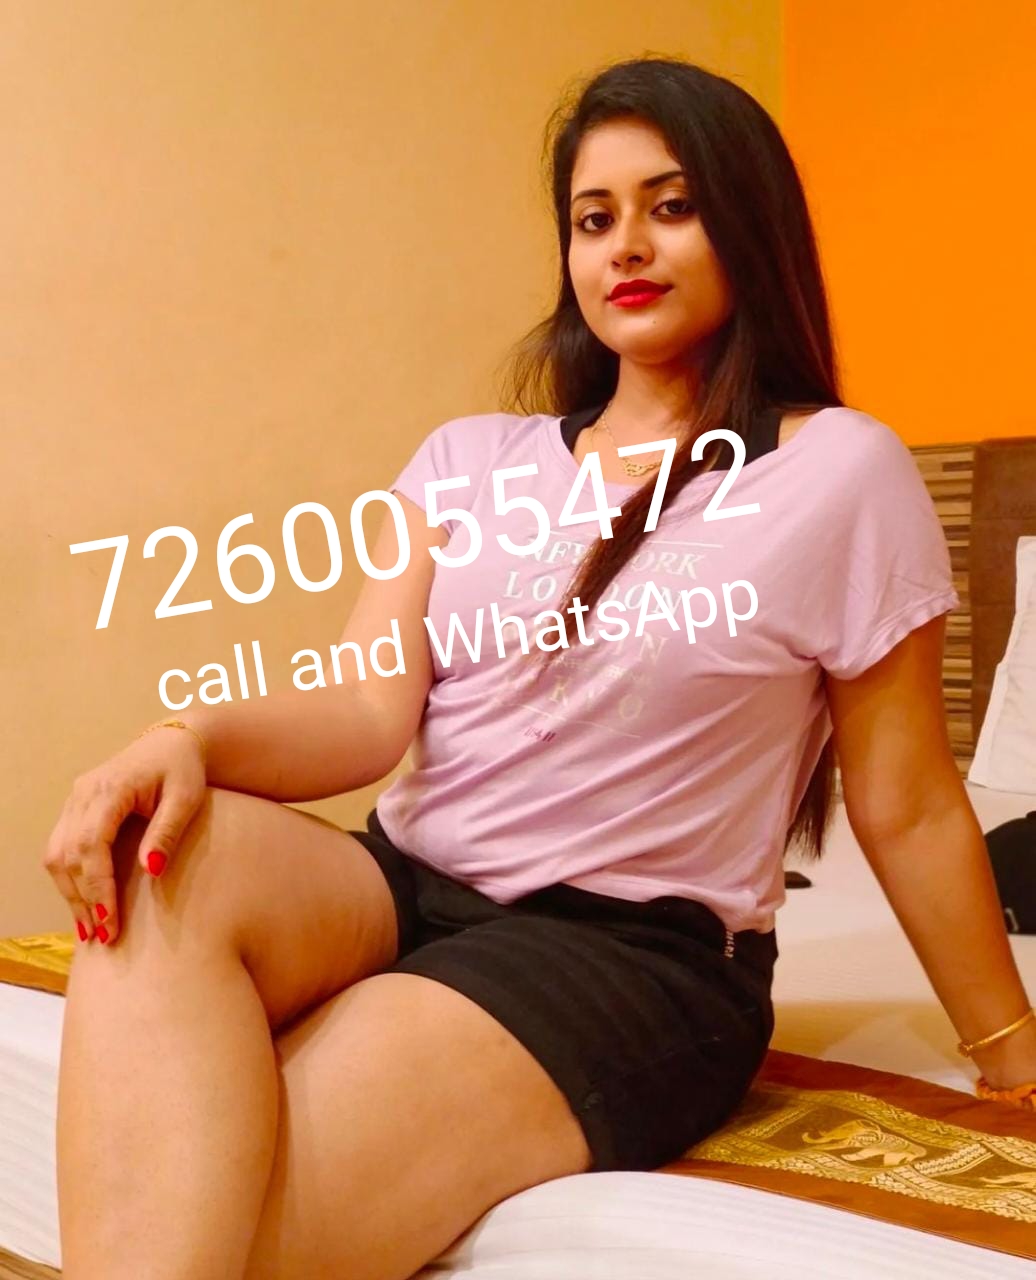 Low price %⭐⭐⭐ genuine sexy VIP call girls are provided safgx